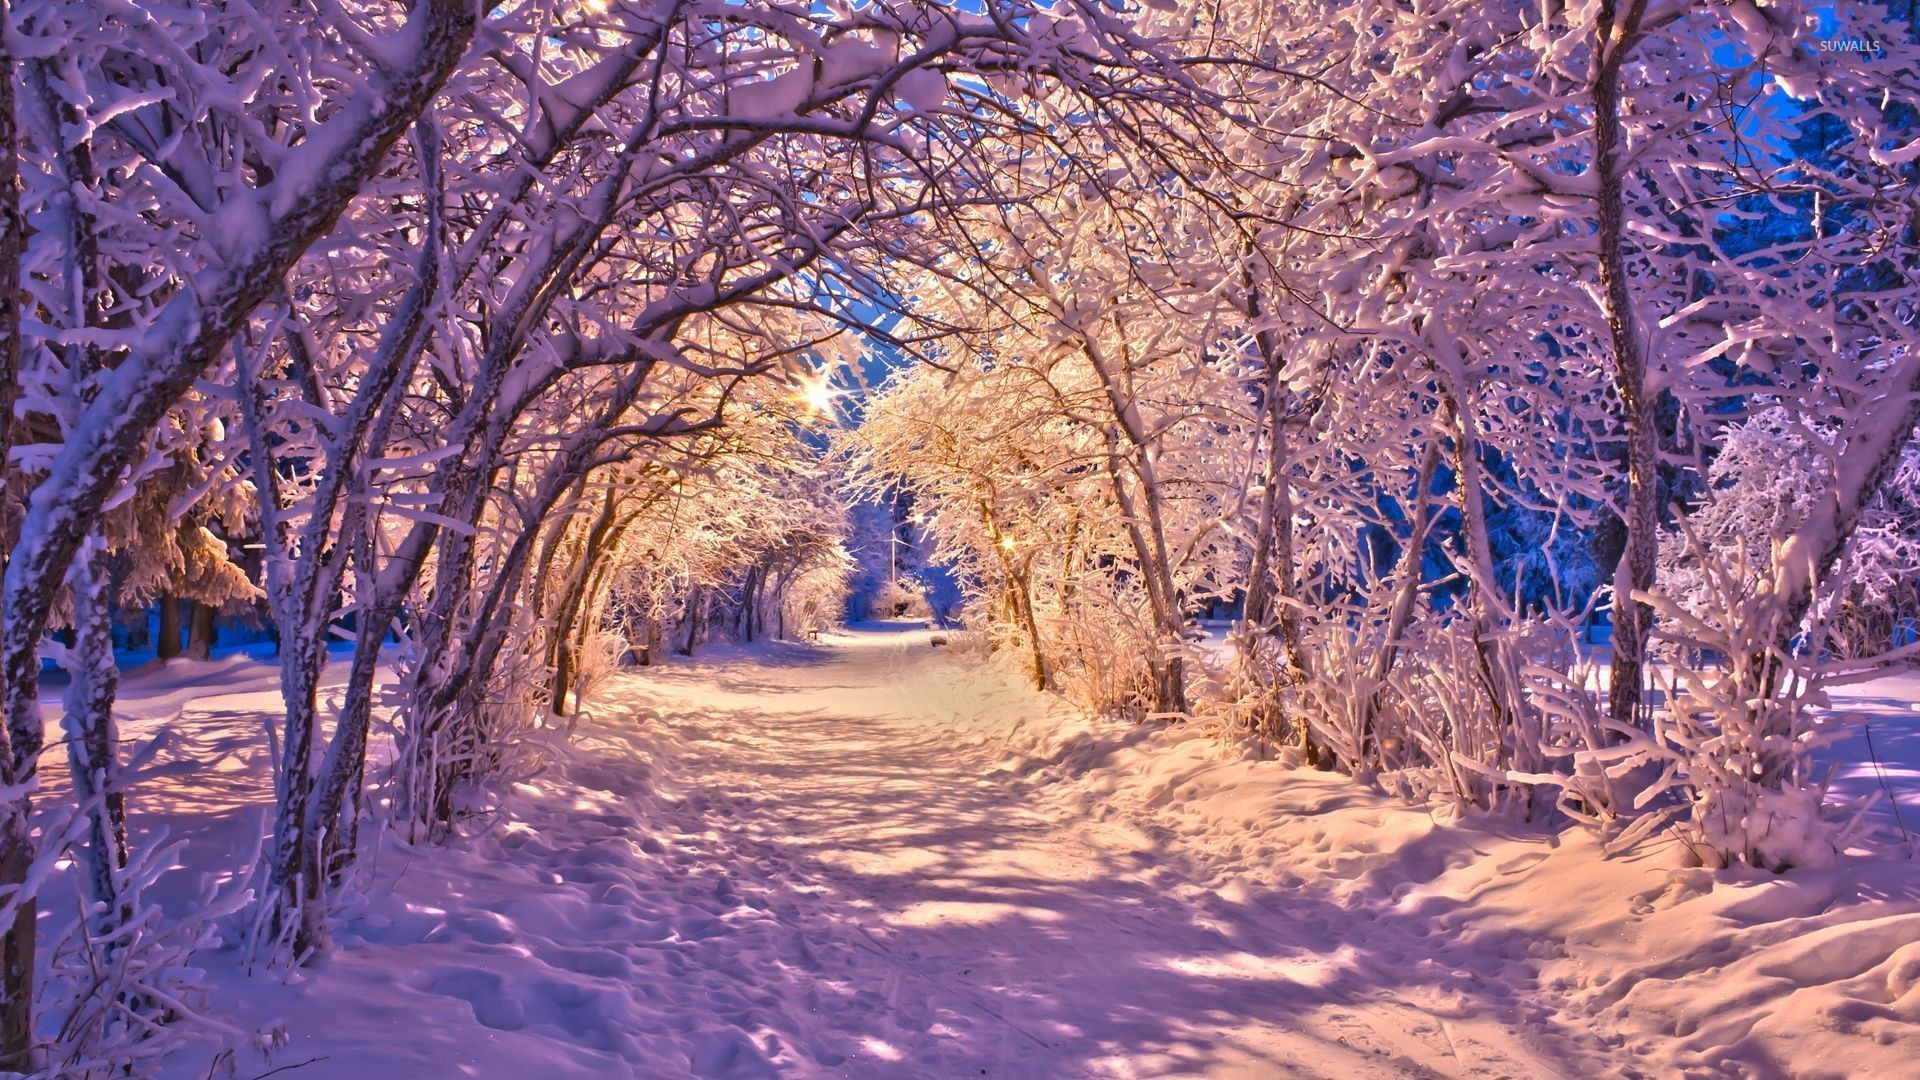 1920x1080 Snowy tree tunnel on the path through the park wallpaper